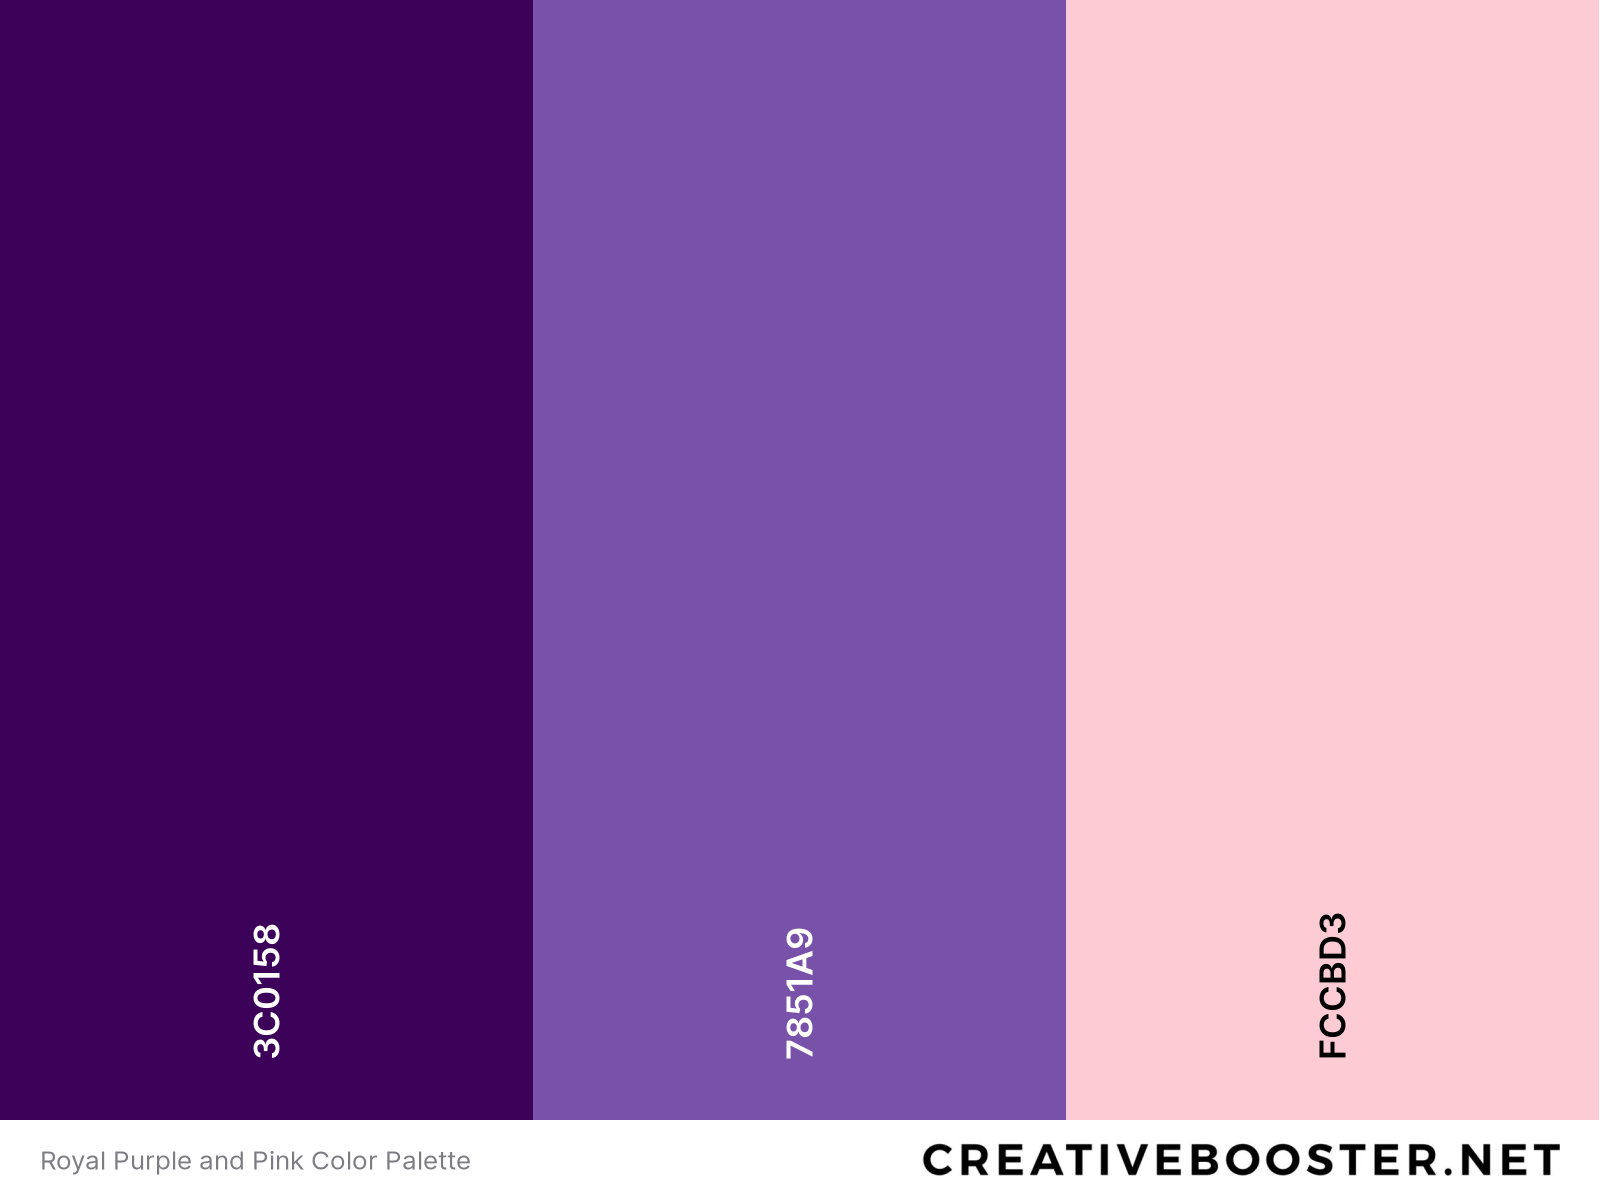 Royal Purple and Pink Color Palette